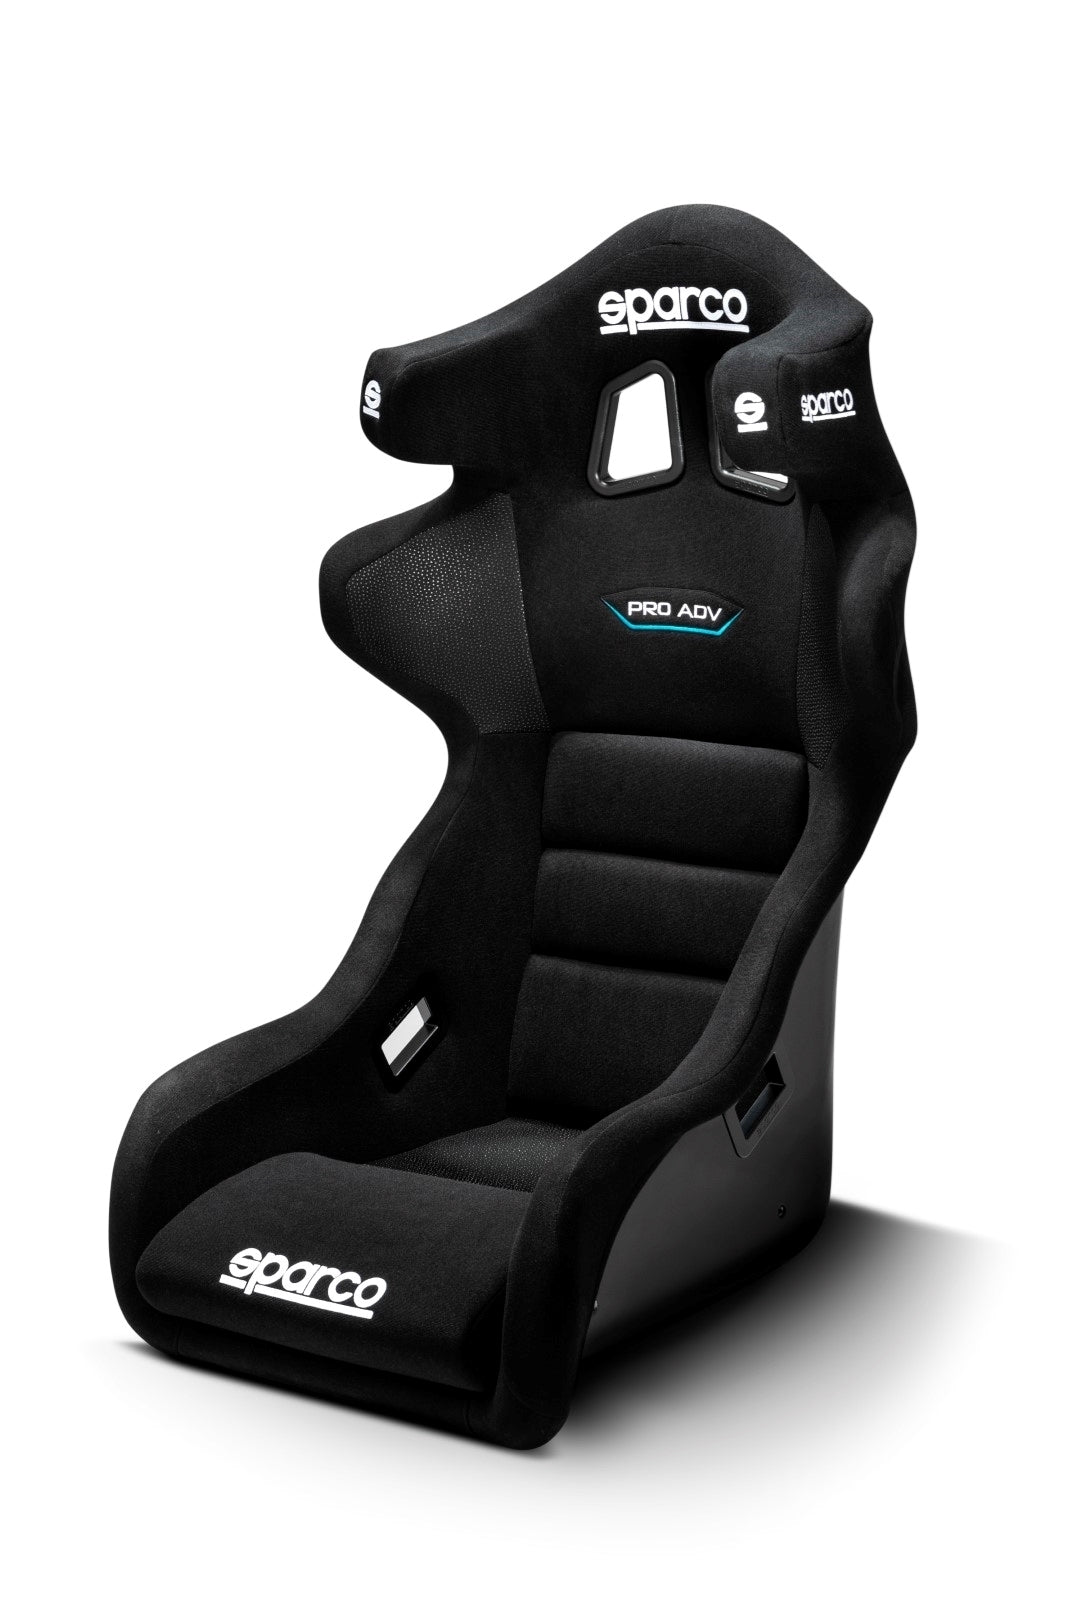 Sparco Pro ADV QRT (2020) Racing Seat